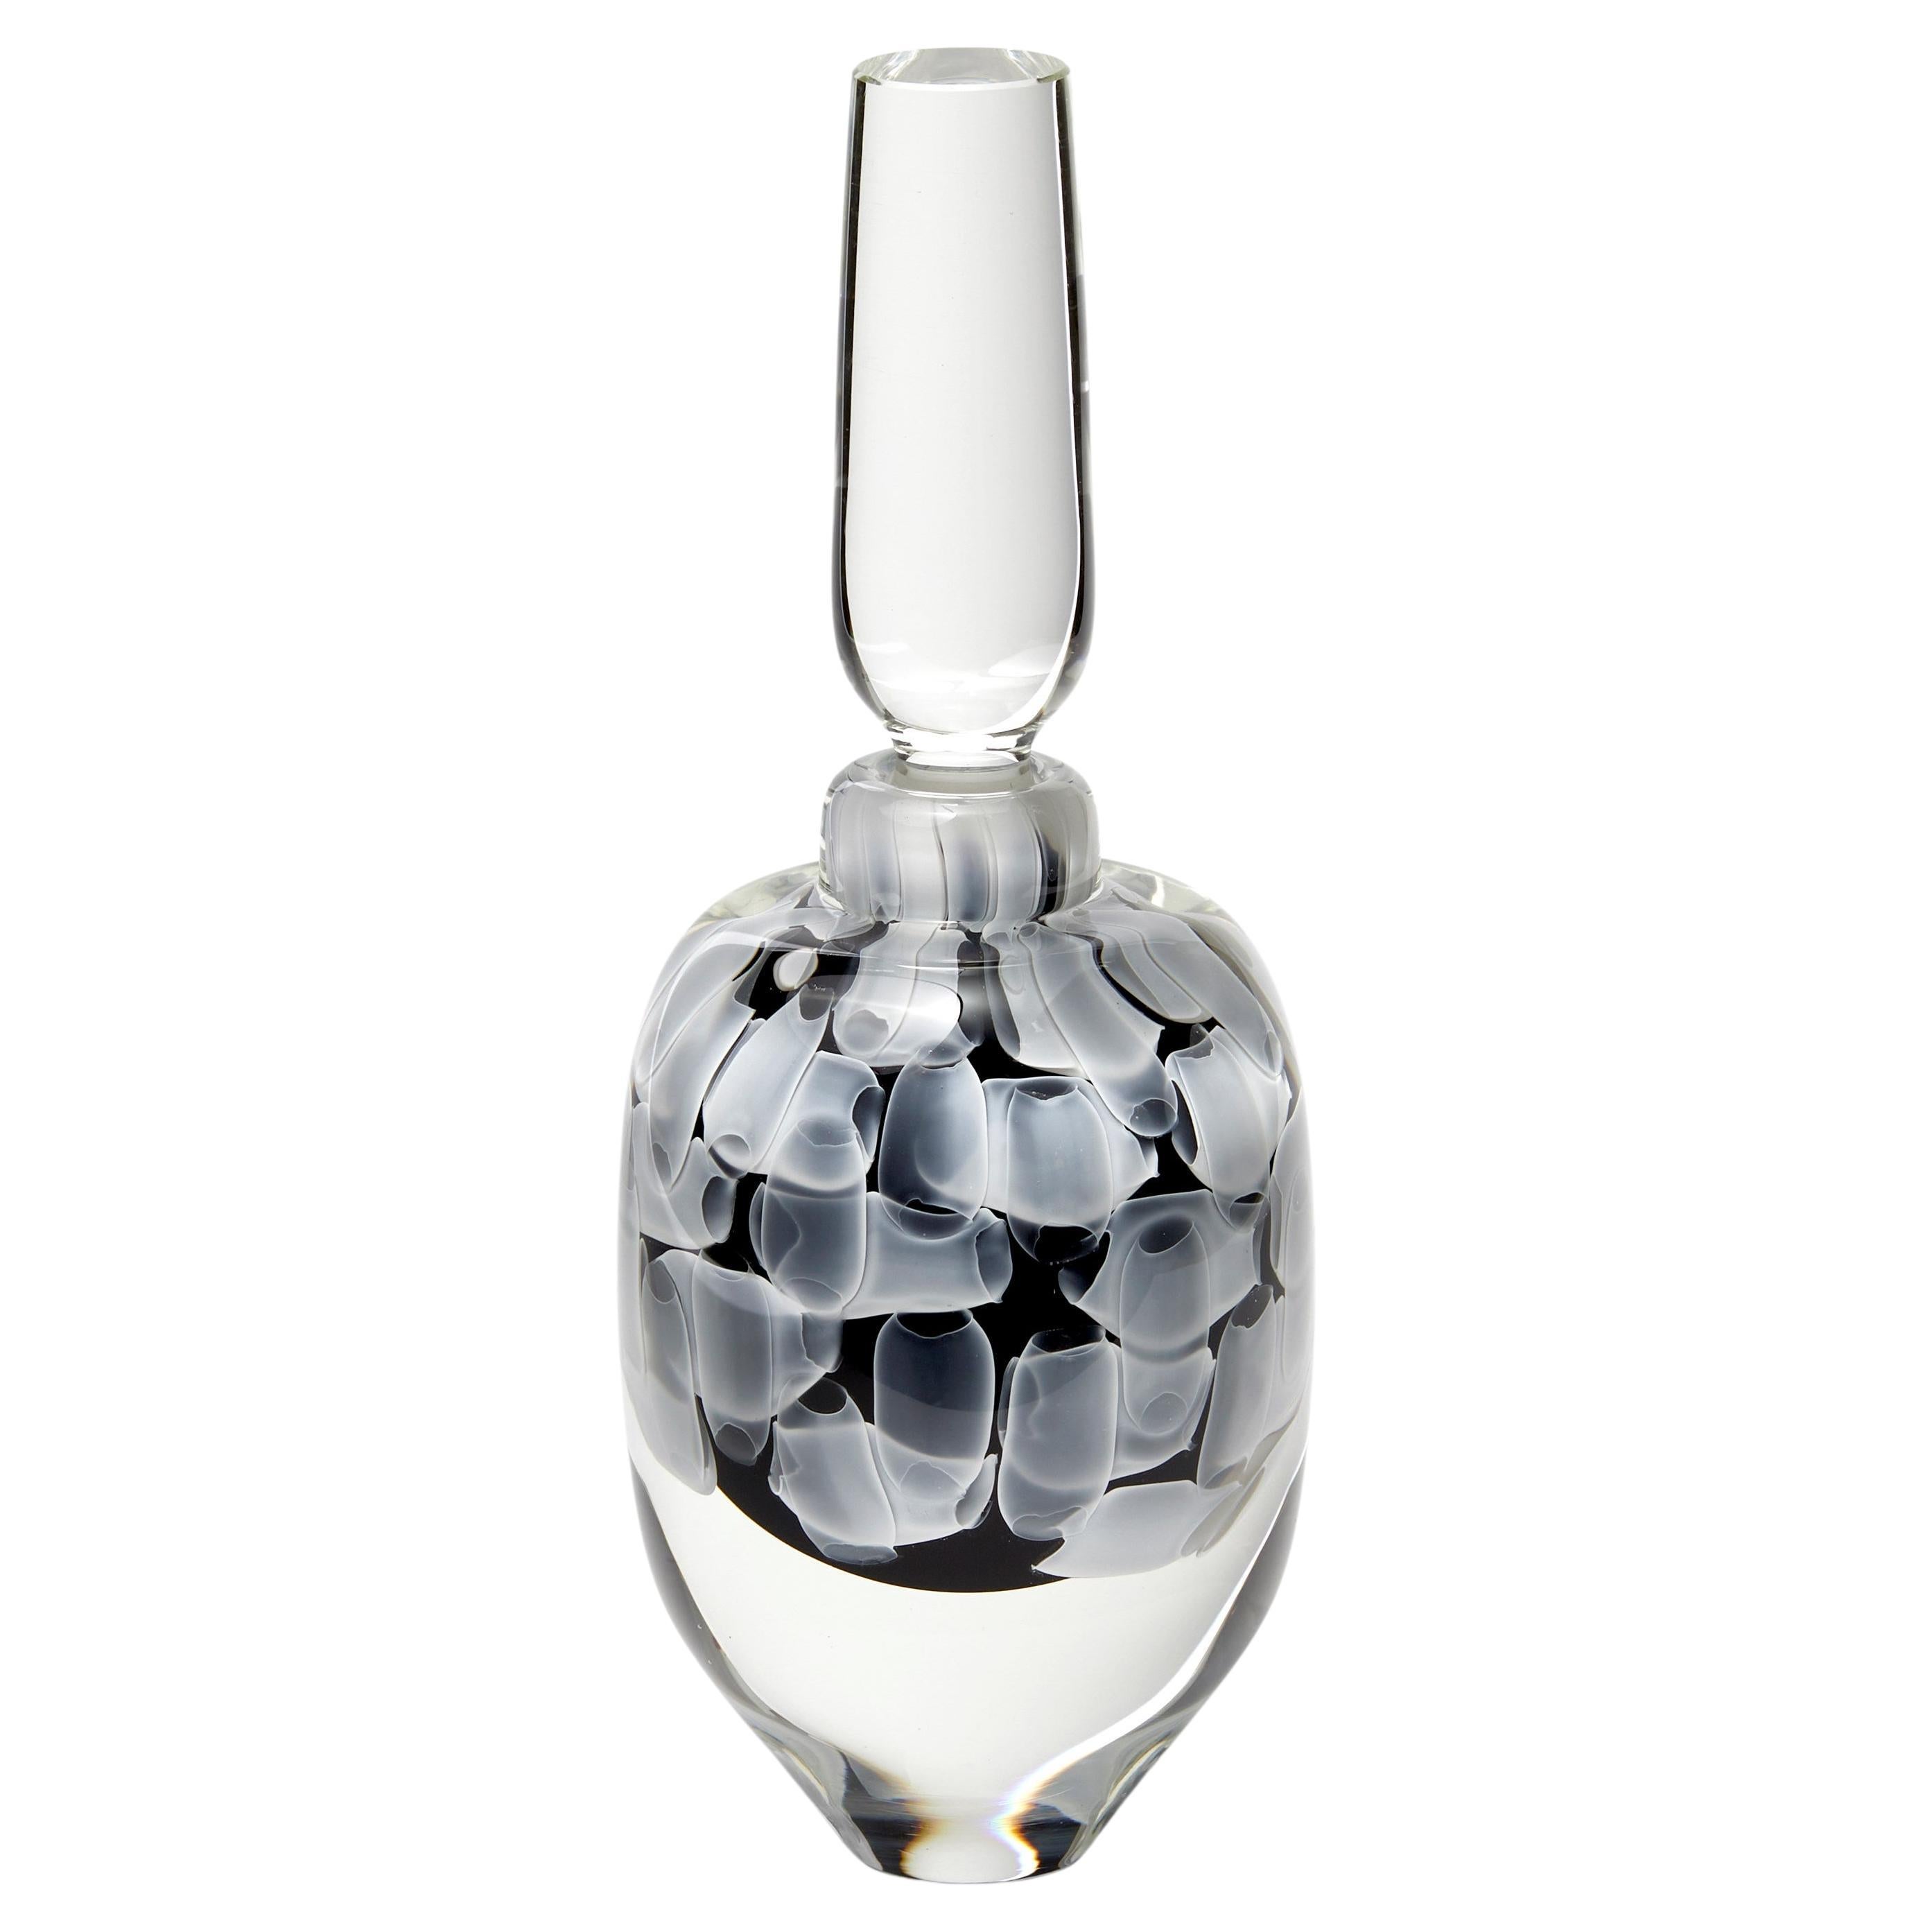 Beula, a Black, White & Clear Large Sculptural Glass Bottle by Peter Bowles For Sale